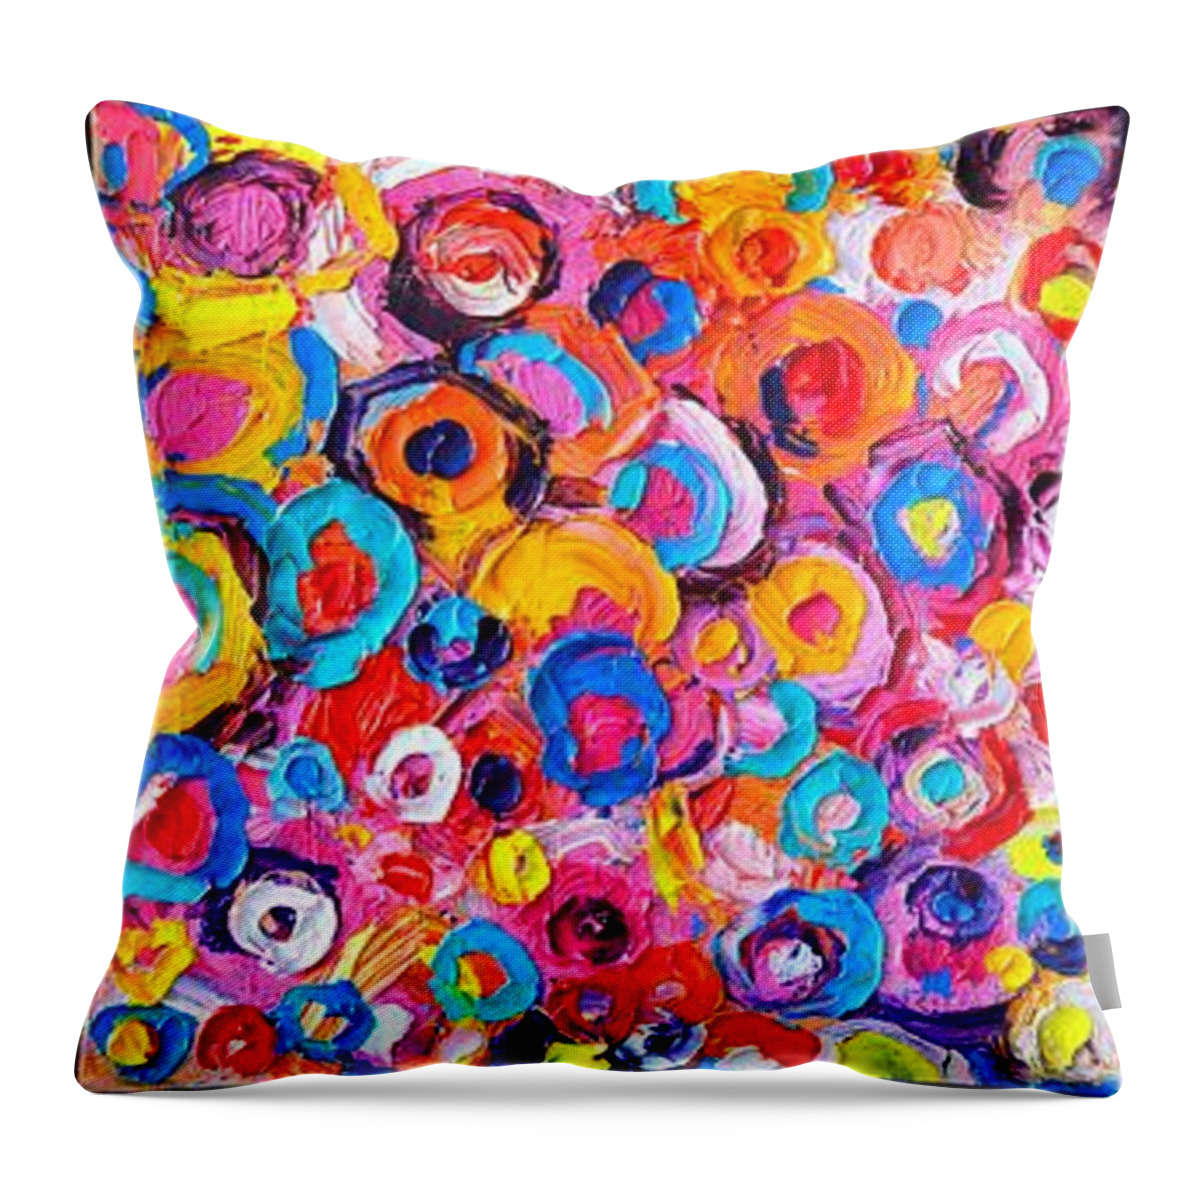 Abstract Throw Pillow featuring the painting Abstract Colorful Flowers Triptych by Ana Maria Edulescu